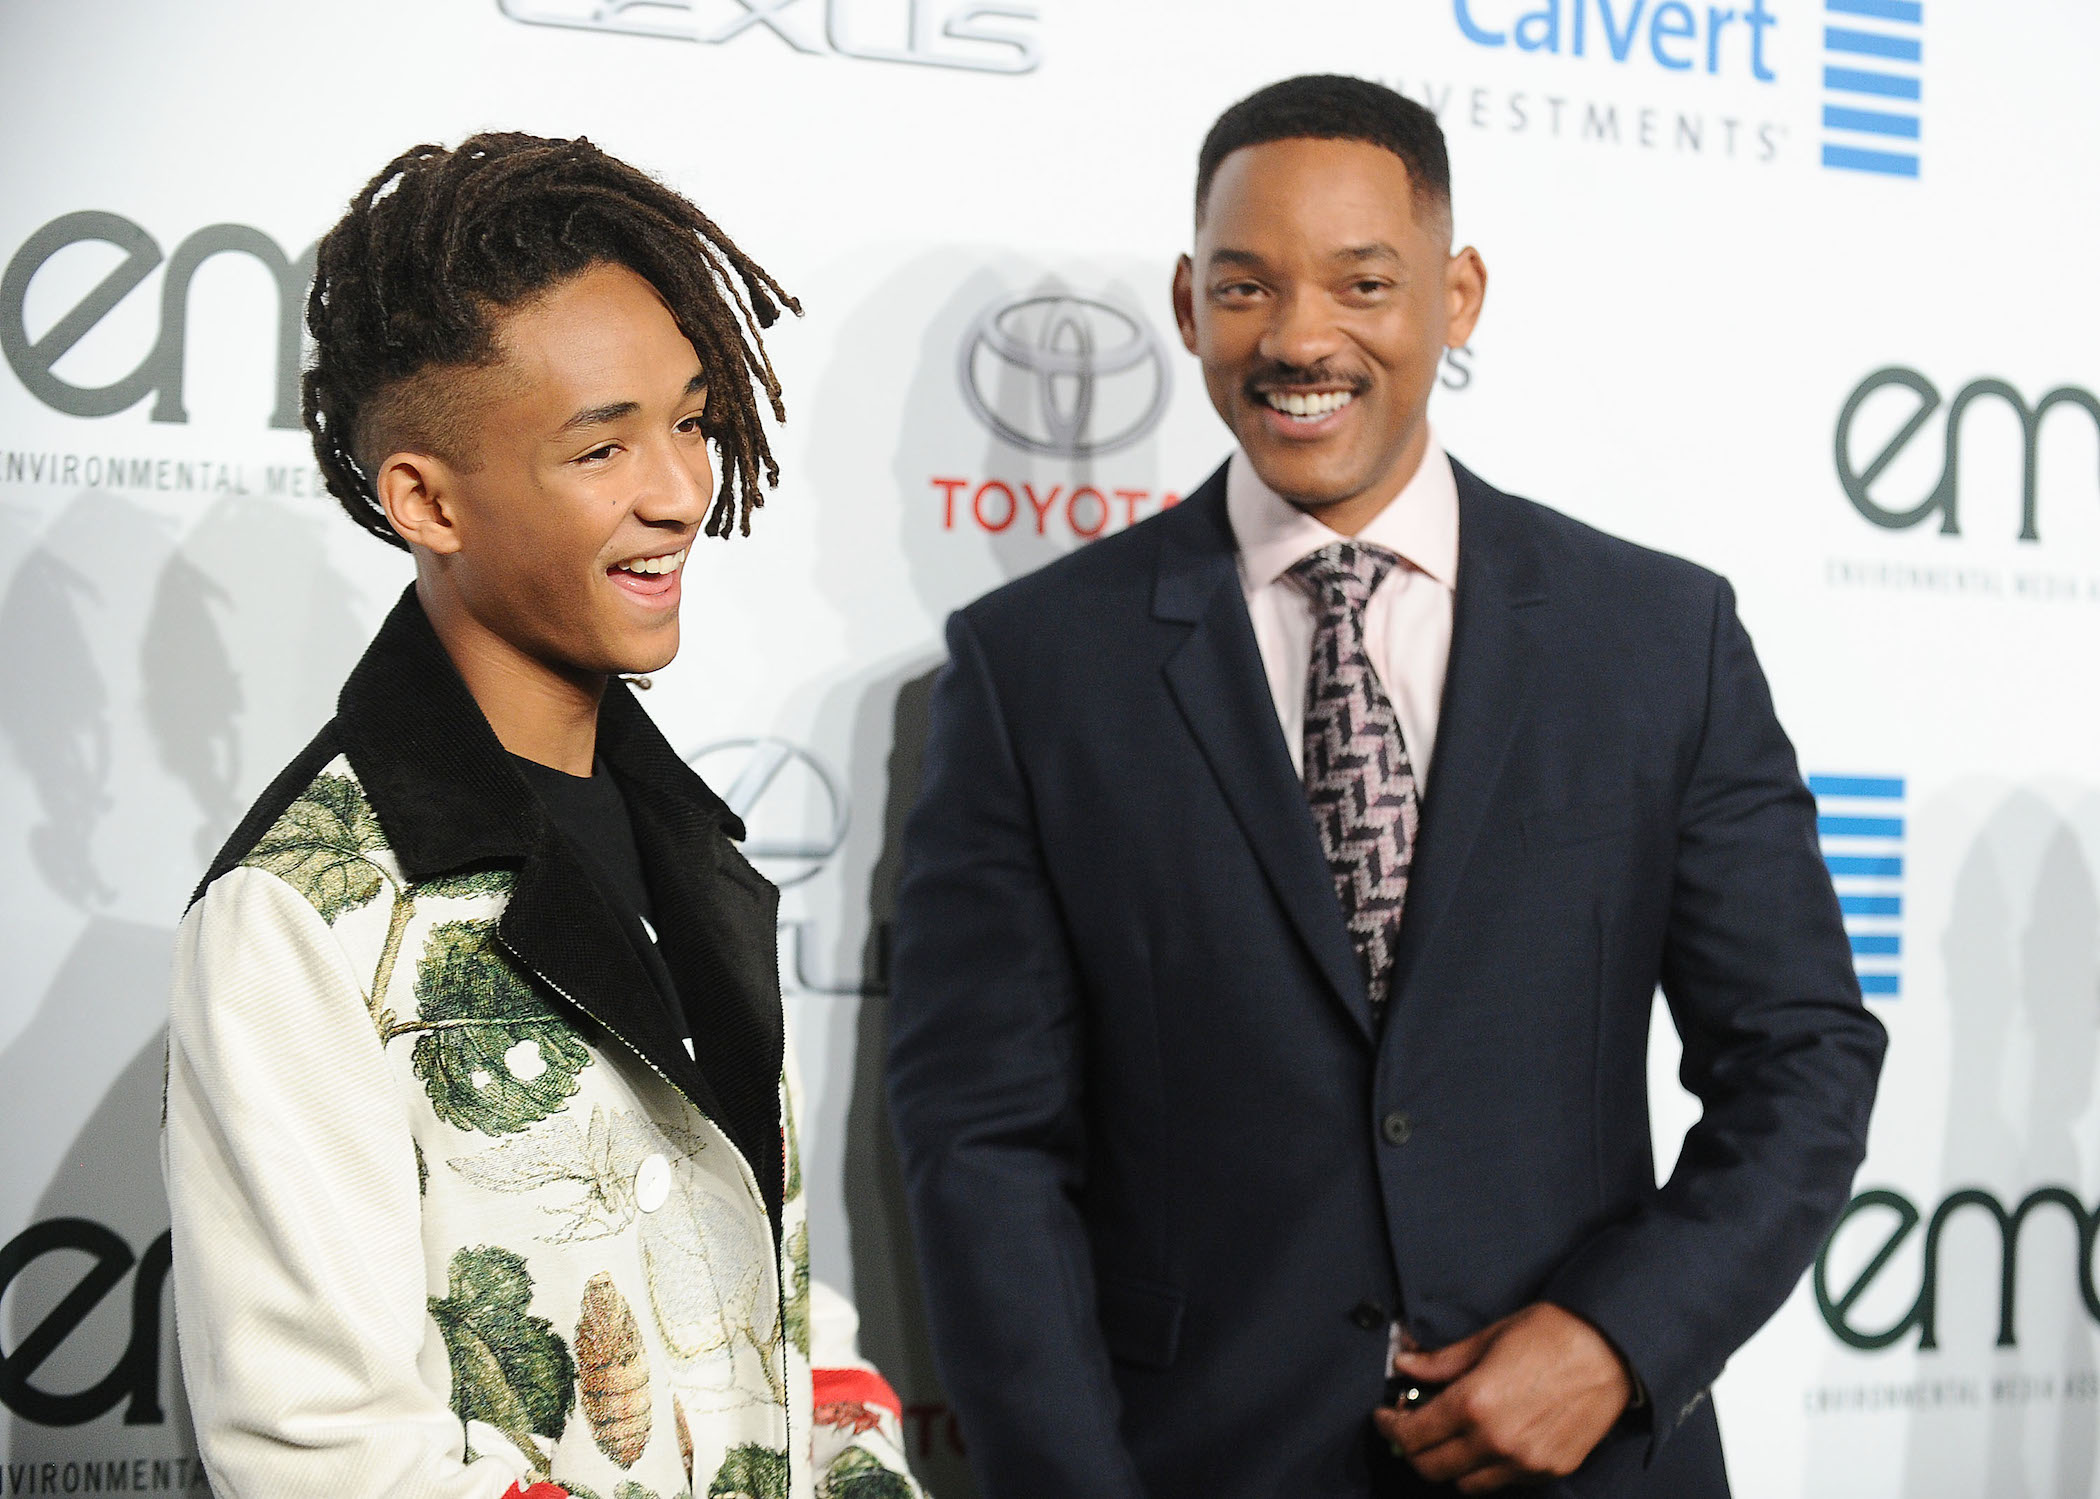 Jaden Smith and Will Smith attend the 26th annual EMA Awards at Warner Bros. Studios on Oct. 22, 2016 in Burbank, California